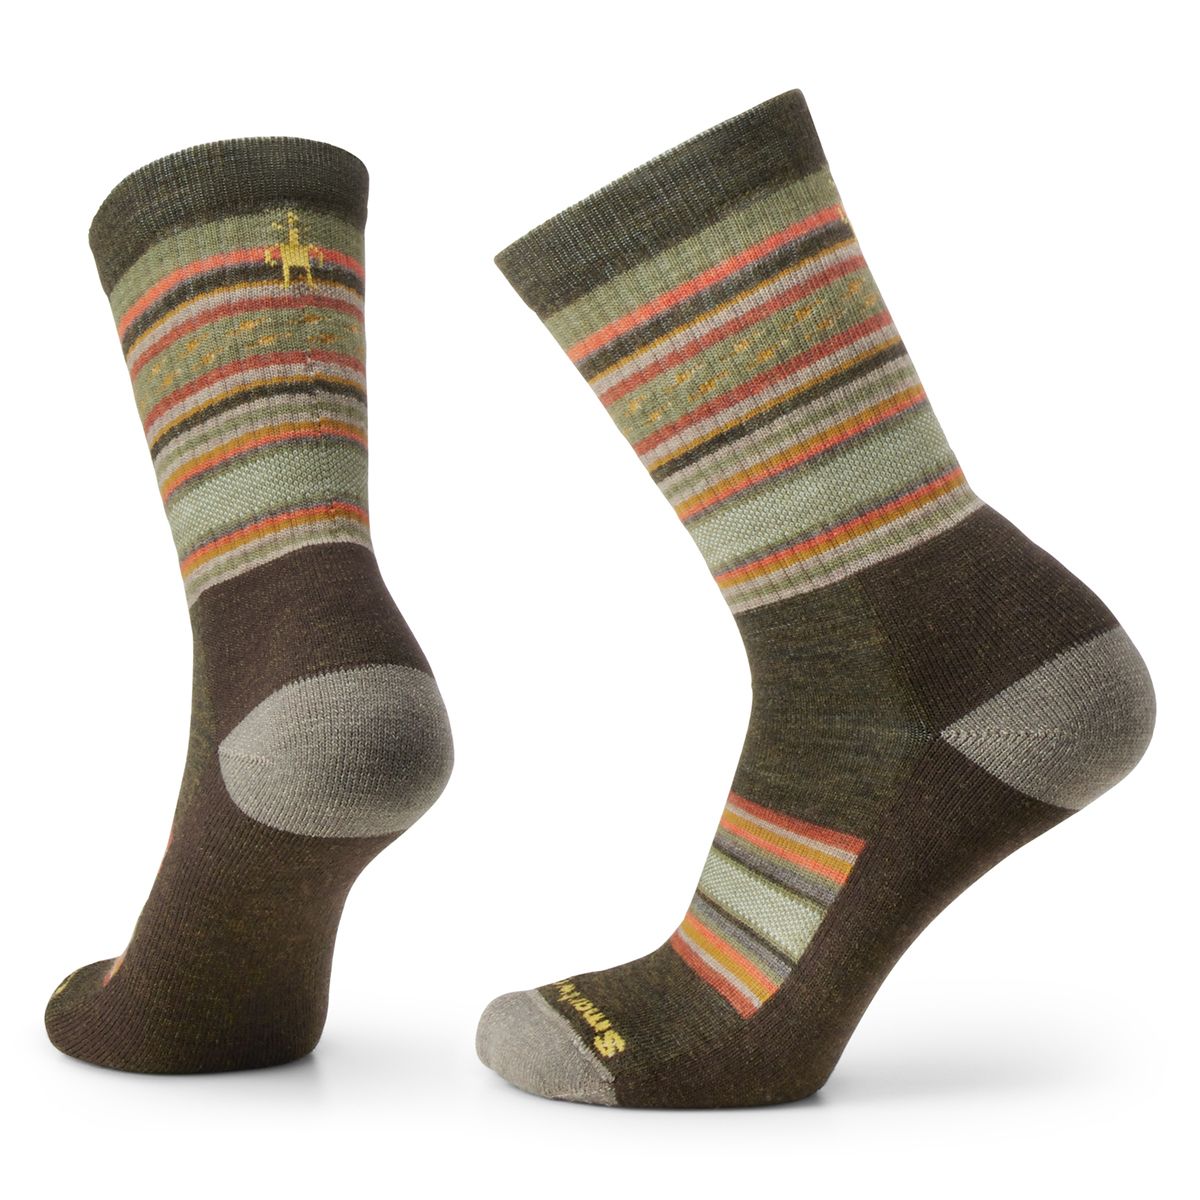 It's that time of year again! Smartwool wants your old socks. Any